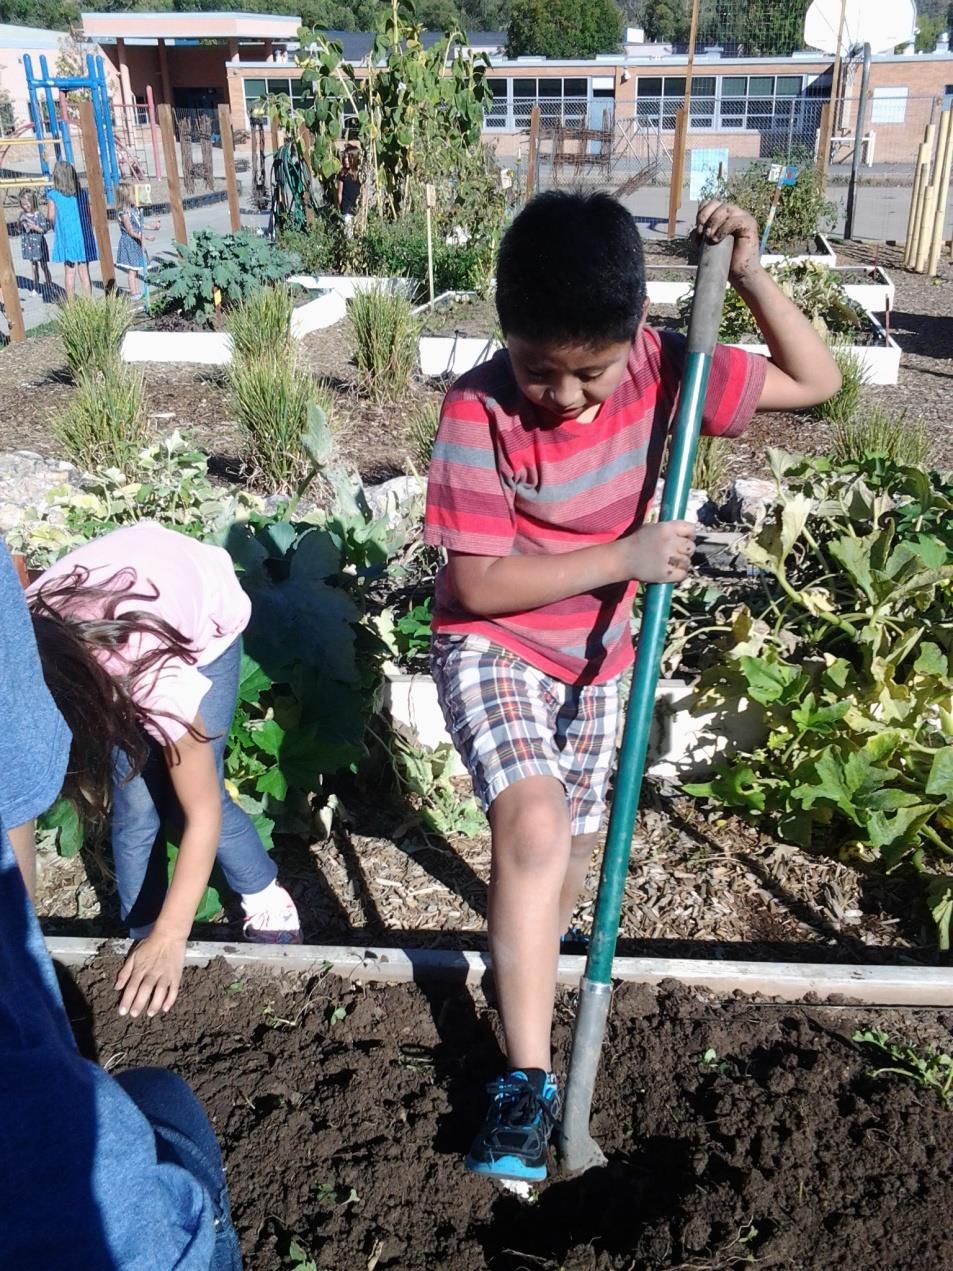 Objectives 1) Helping schools and nonprofit agencies create and/or enhance community and school garden programs 2) Providing the community with education and workshops on local food and